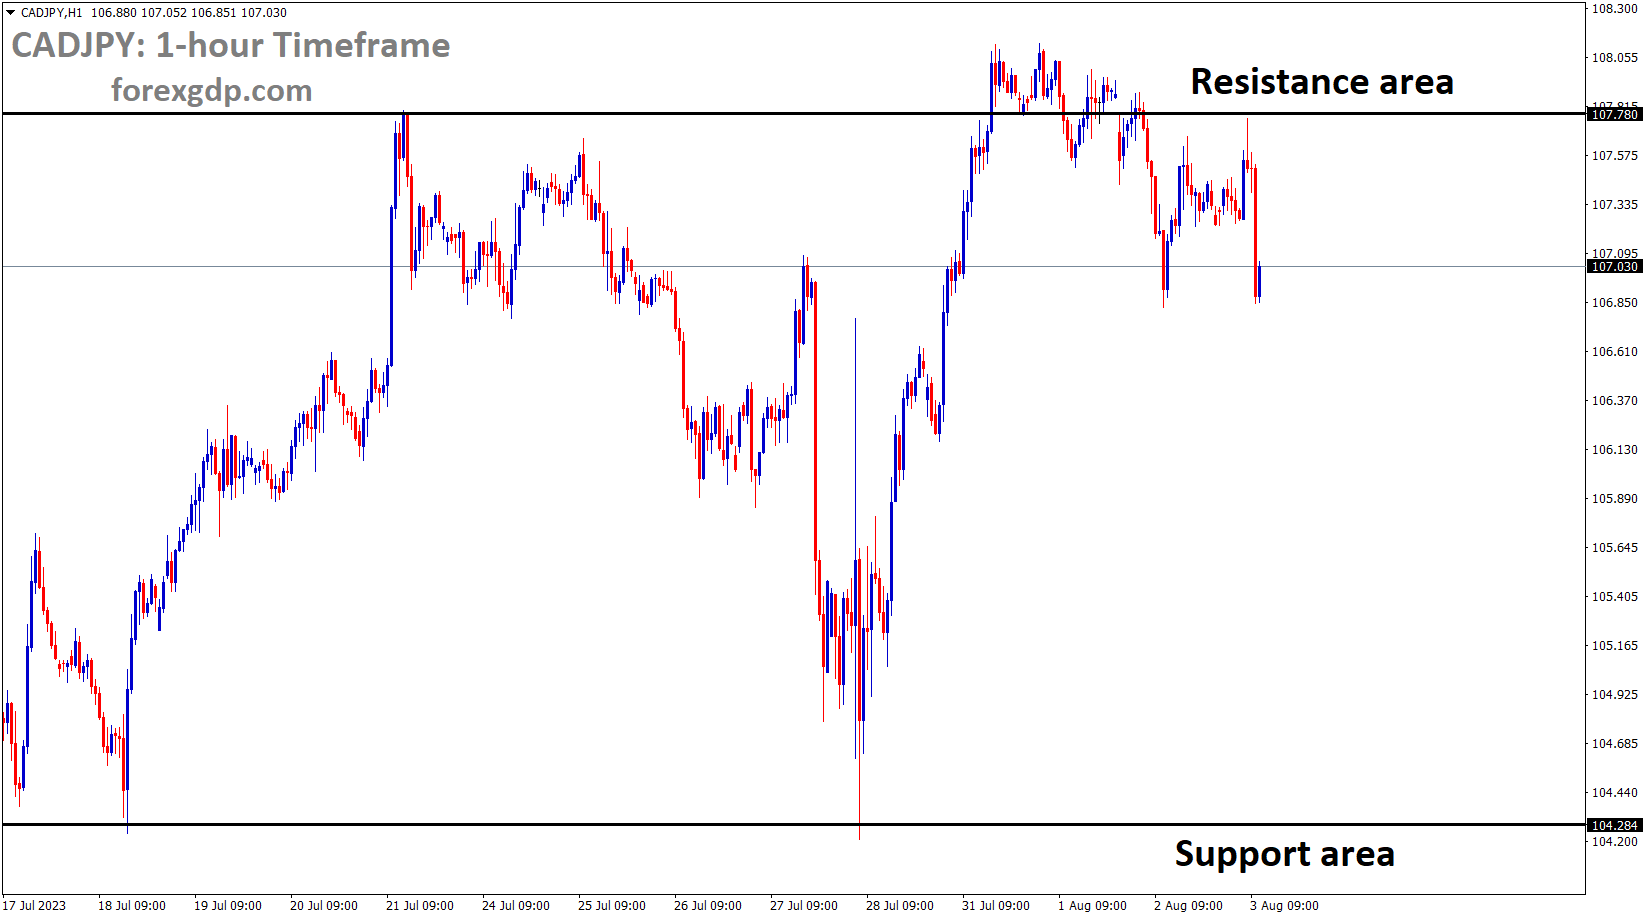 CADJPY is moving in the Box pattern and the market has fallen from the resistance area of the pattern